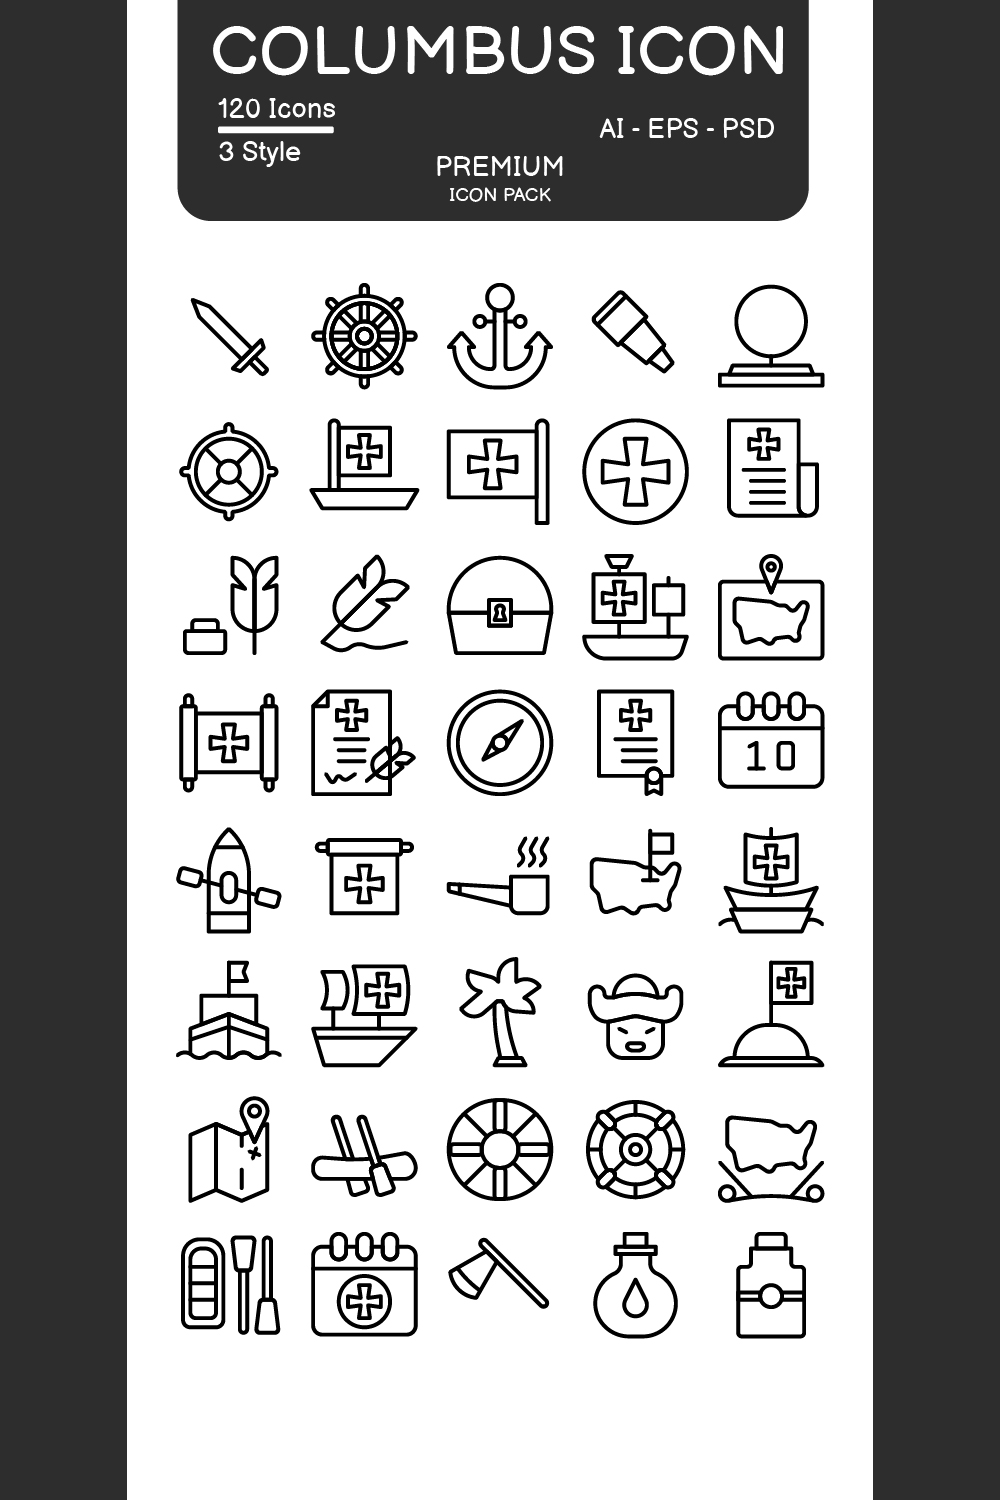 Columbus icon set black style illustration vector element and symbol perfect pinterest preview image.